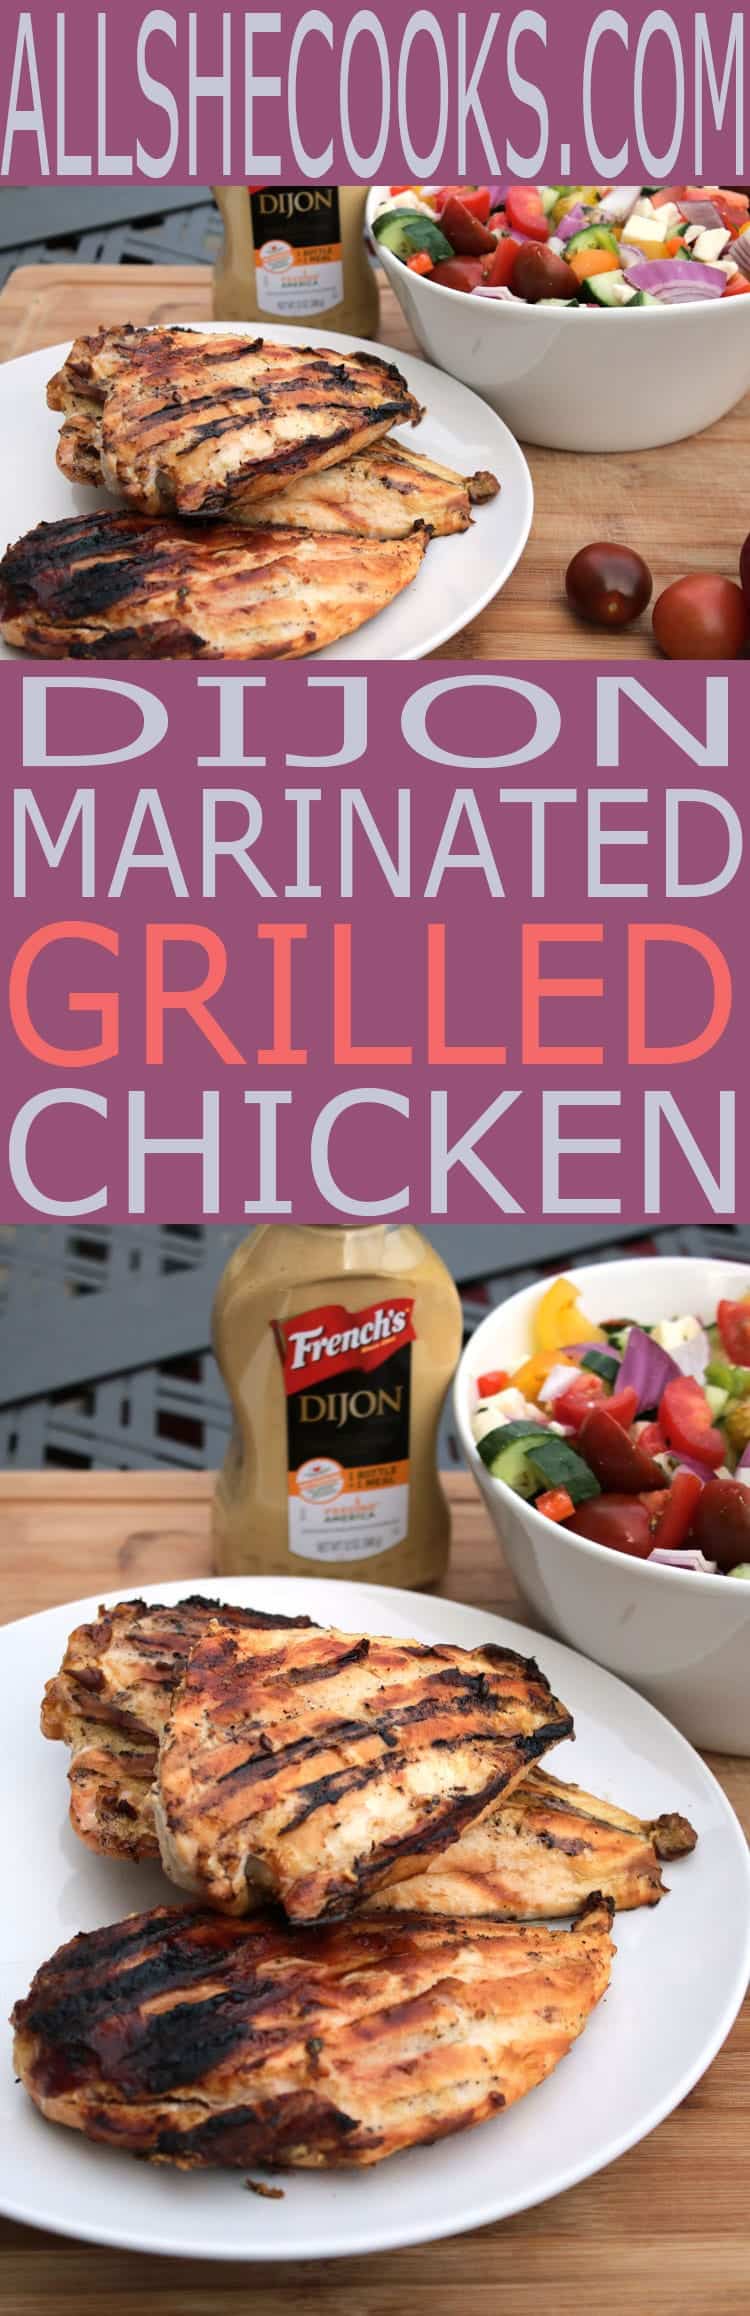 Enjoy a delicious, moist grilled chicken recipe with our Dijon Grilled Chicken. Chicken is marinated and grilled with Dijon mustard and seasoned to perfection.